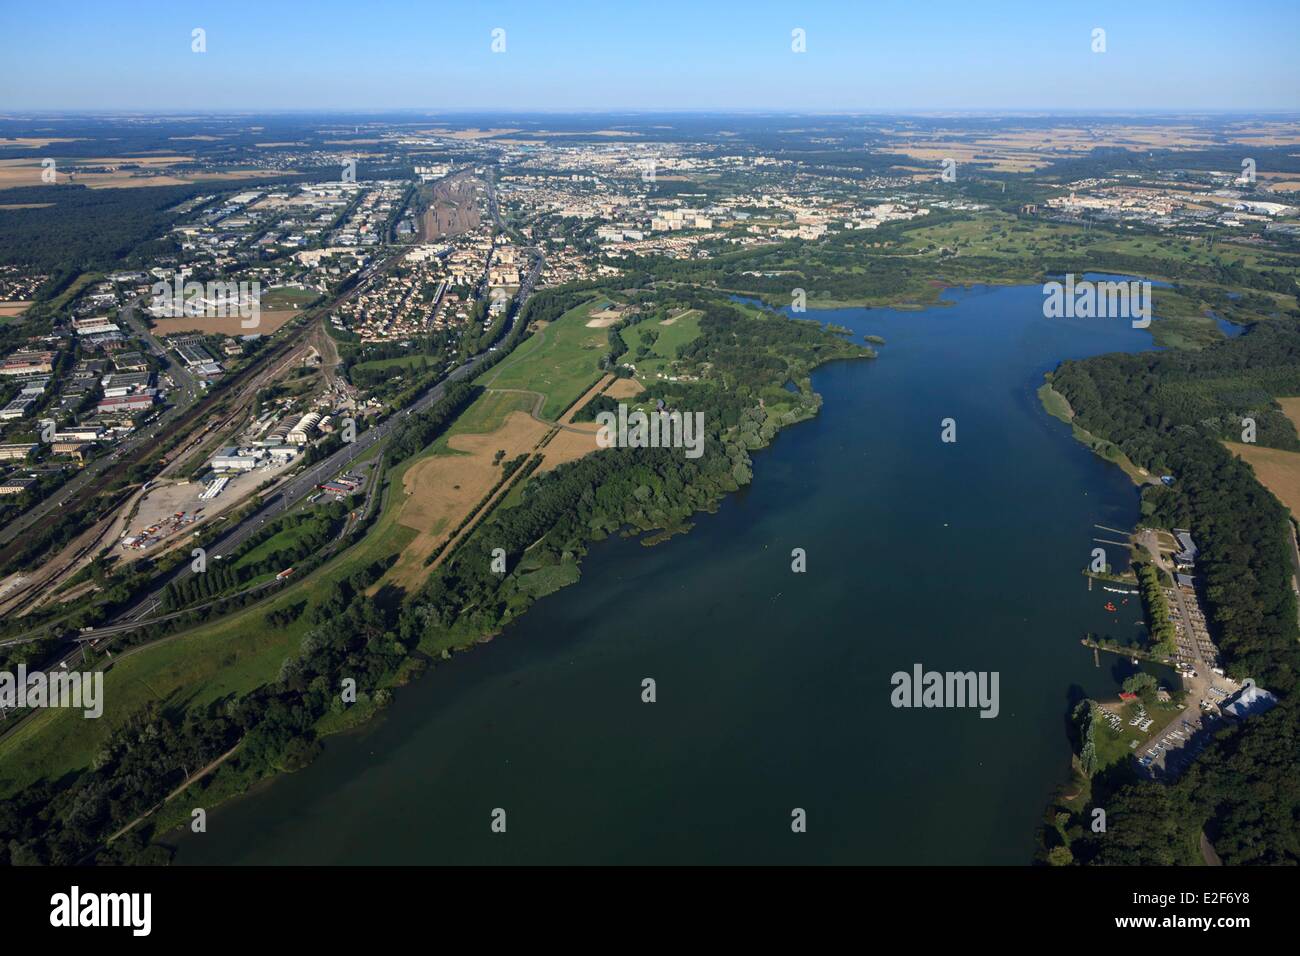 France, Yvelines, Trappes en Yvelines, leisure and nature reserve of Saint Quentin en Yvelines (aerial view) Stock Photo